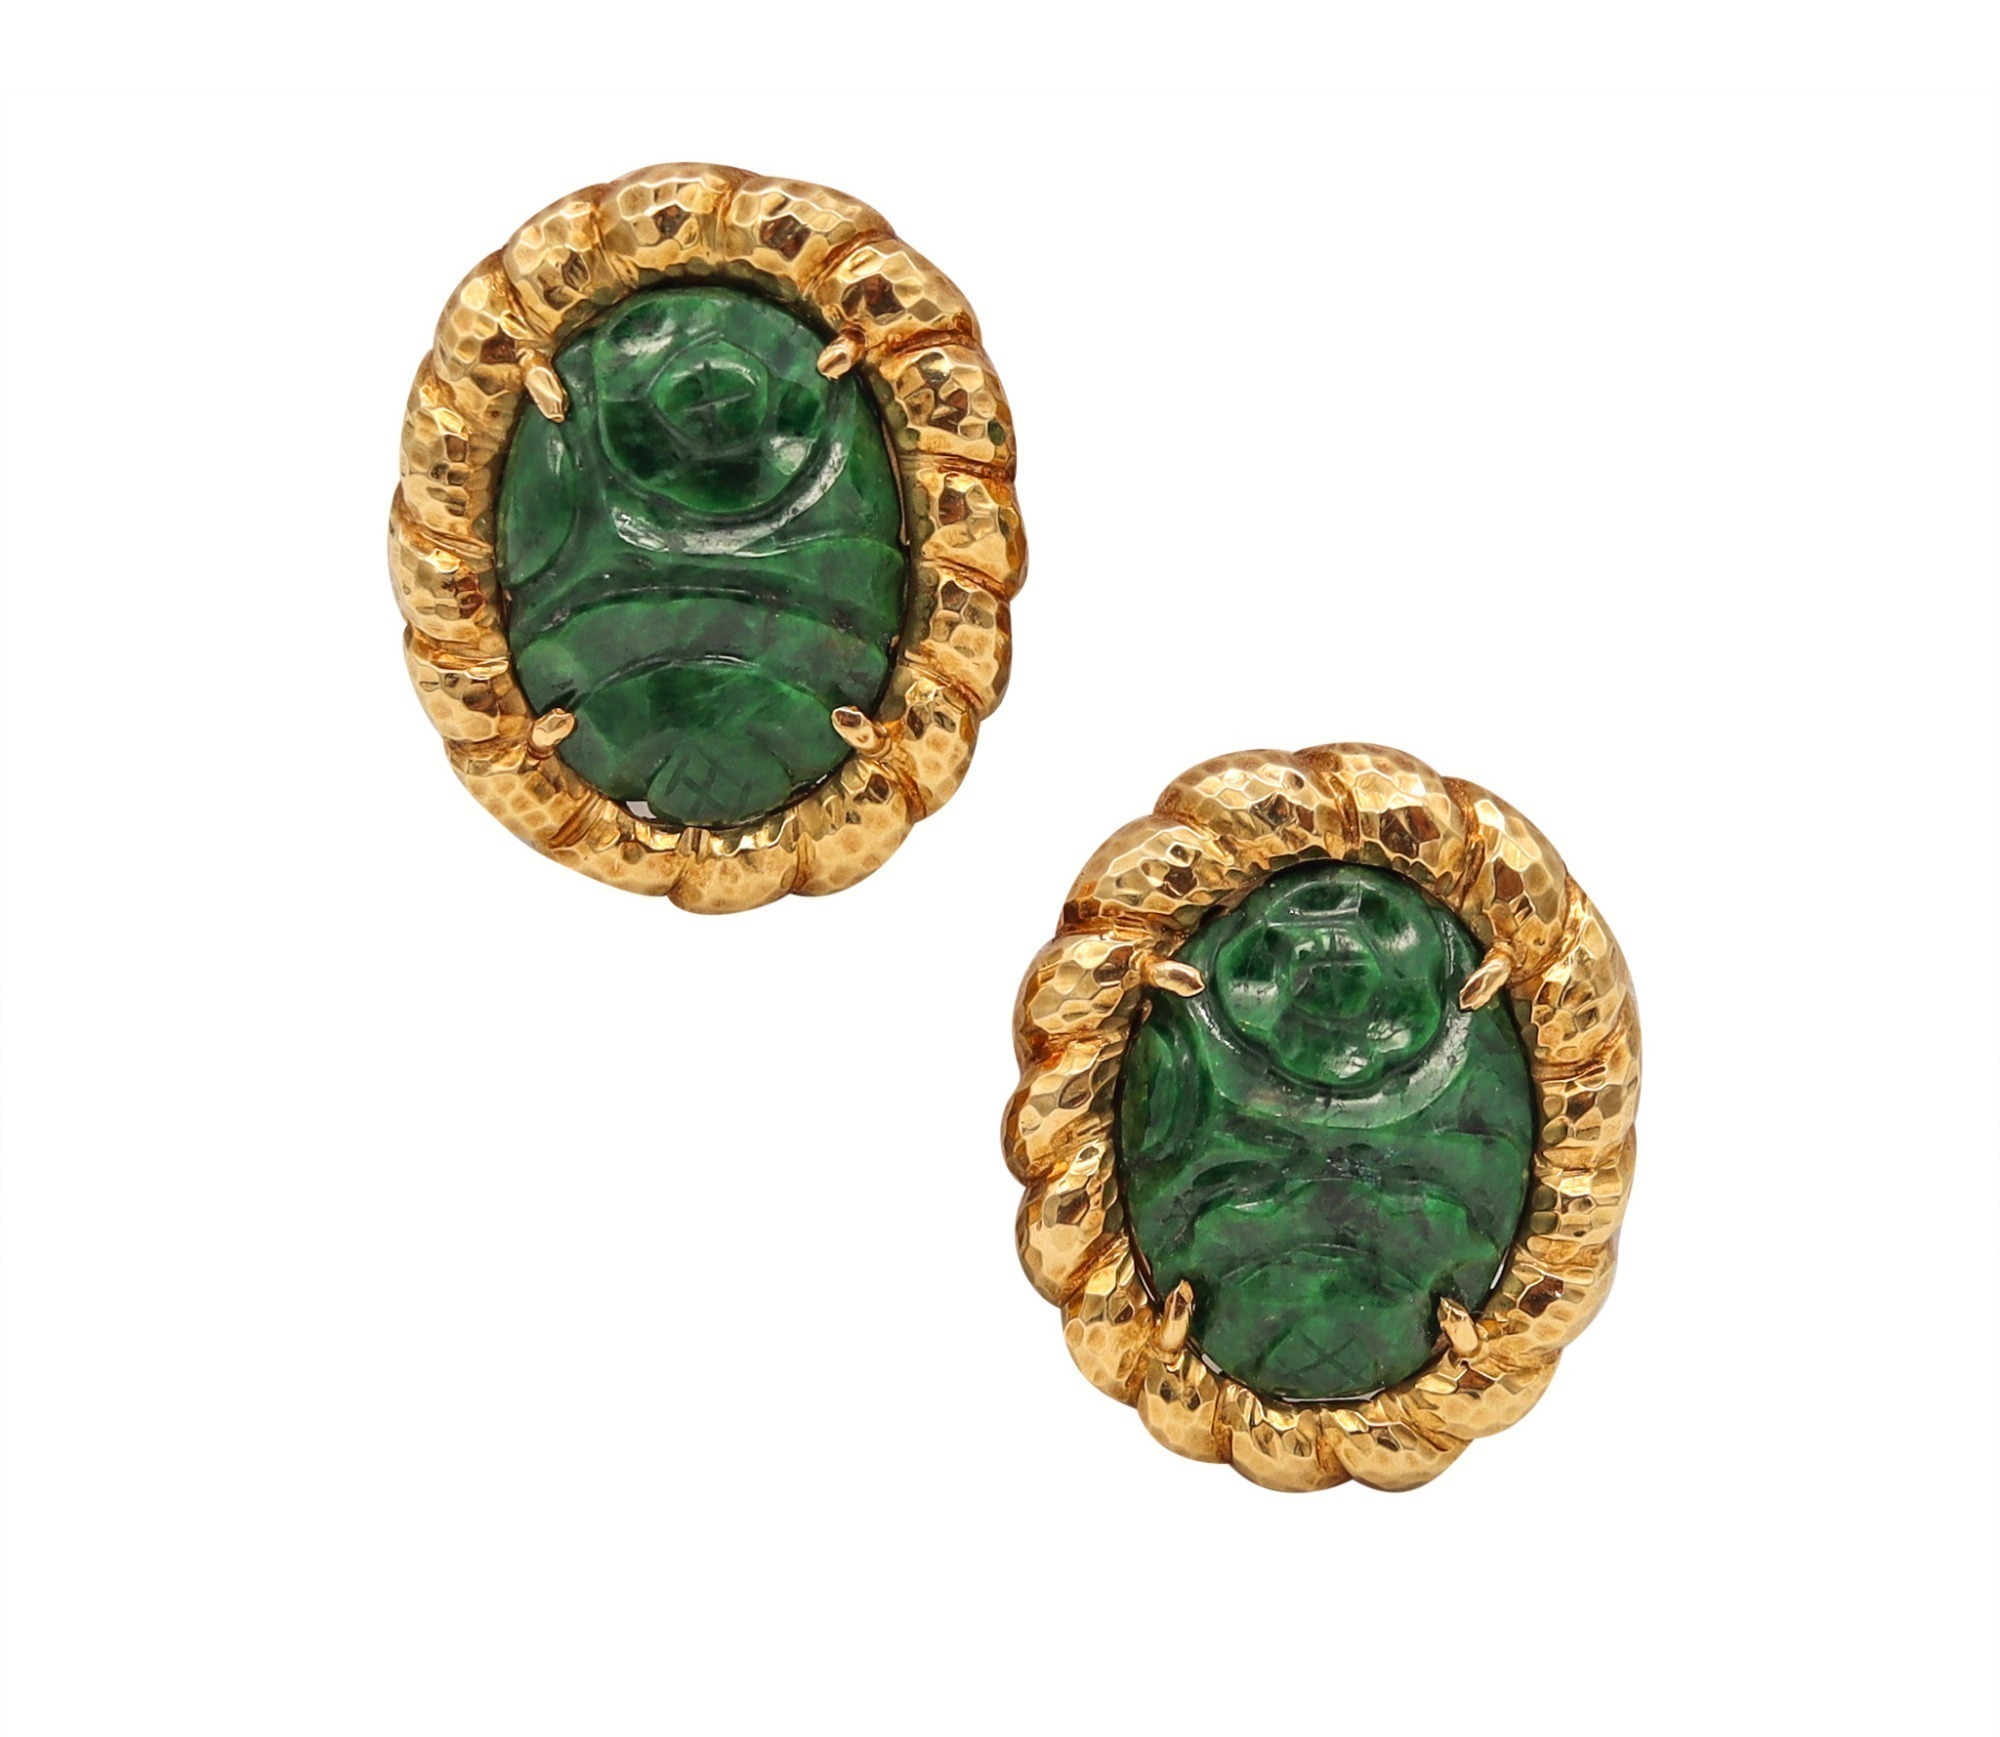 18K GOLD AND CARVED MAW SIT SIT JADE MODERNIST EARRINGS, CIRCA 1970